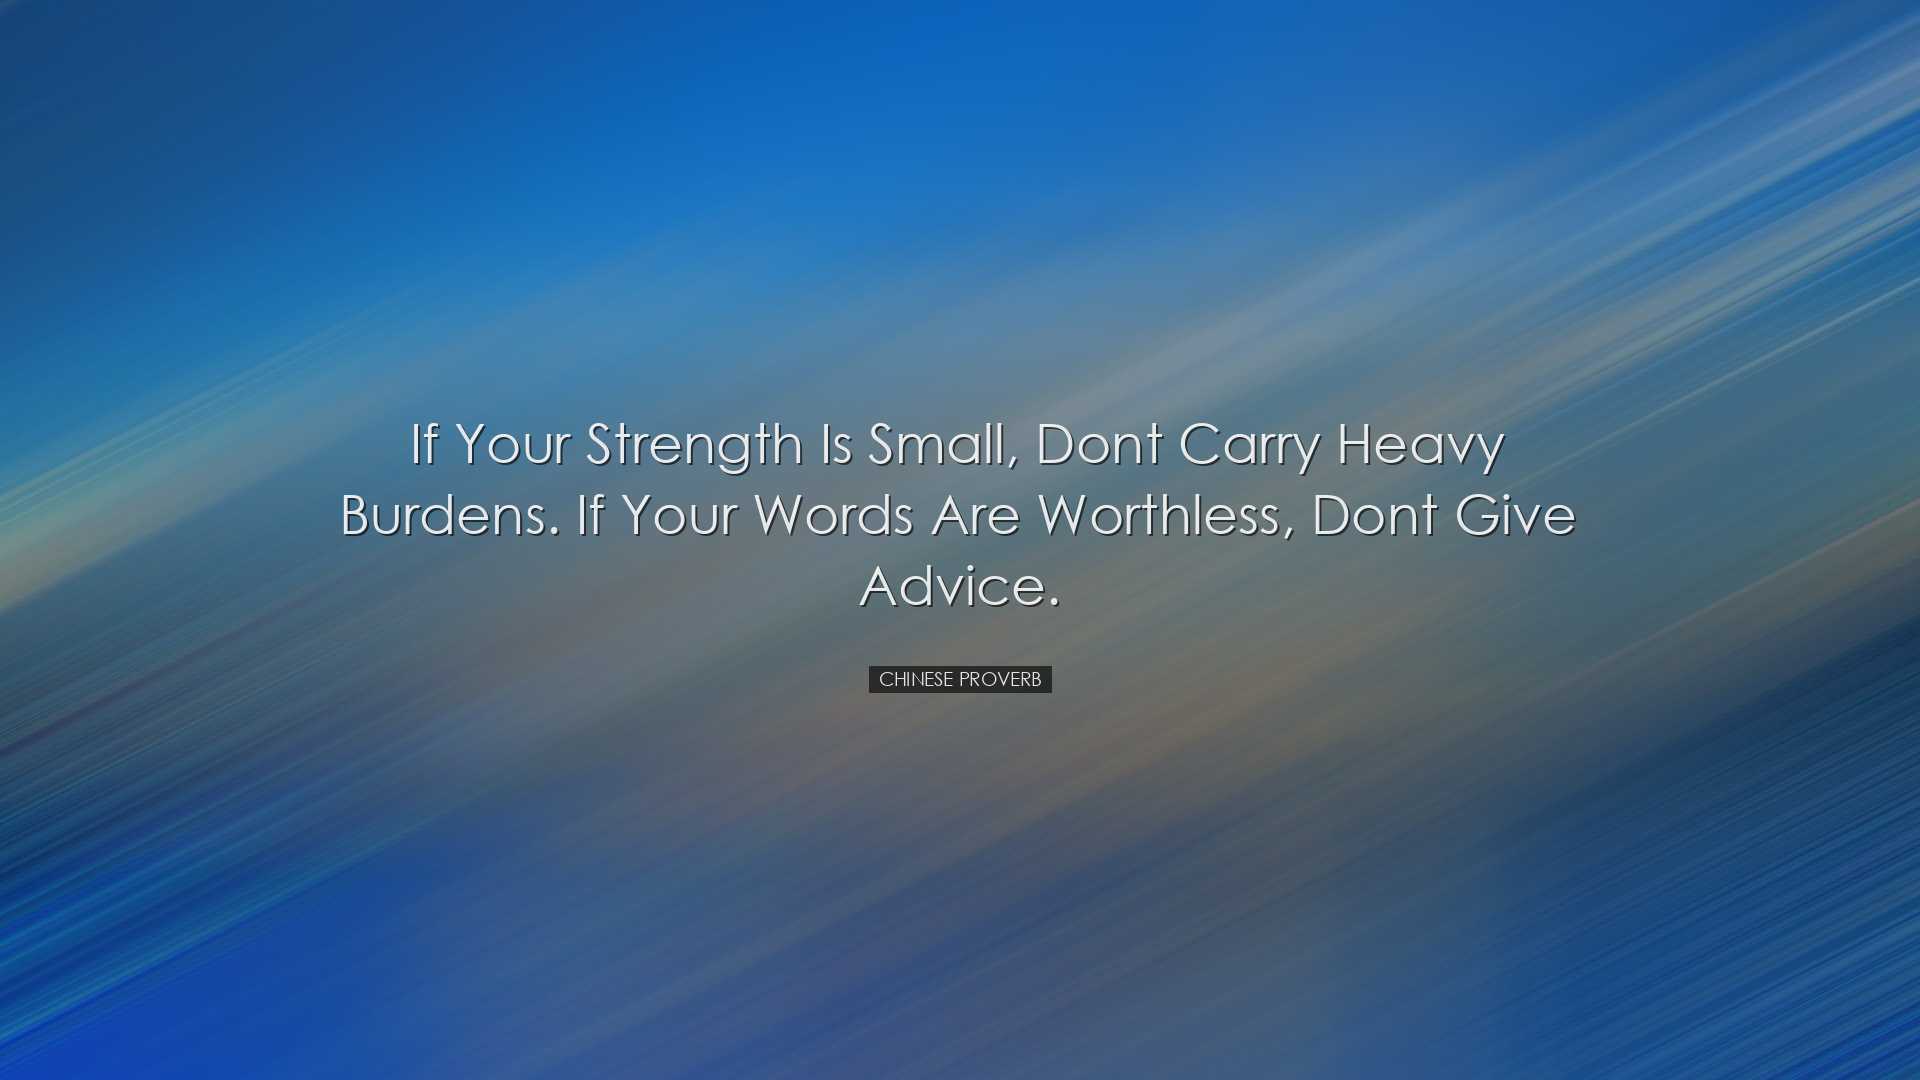 If your strength is small, dont carry heavy burdens. If your words